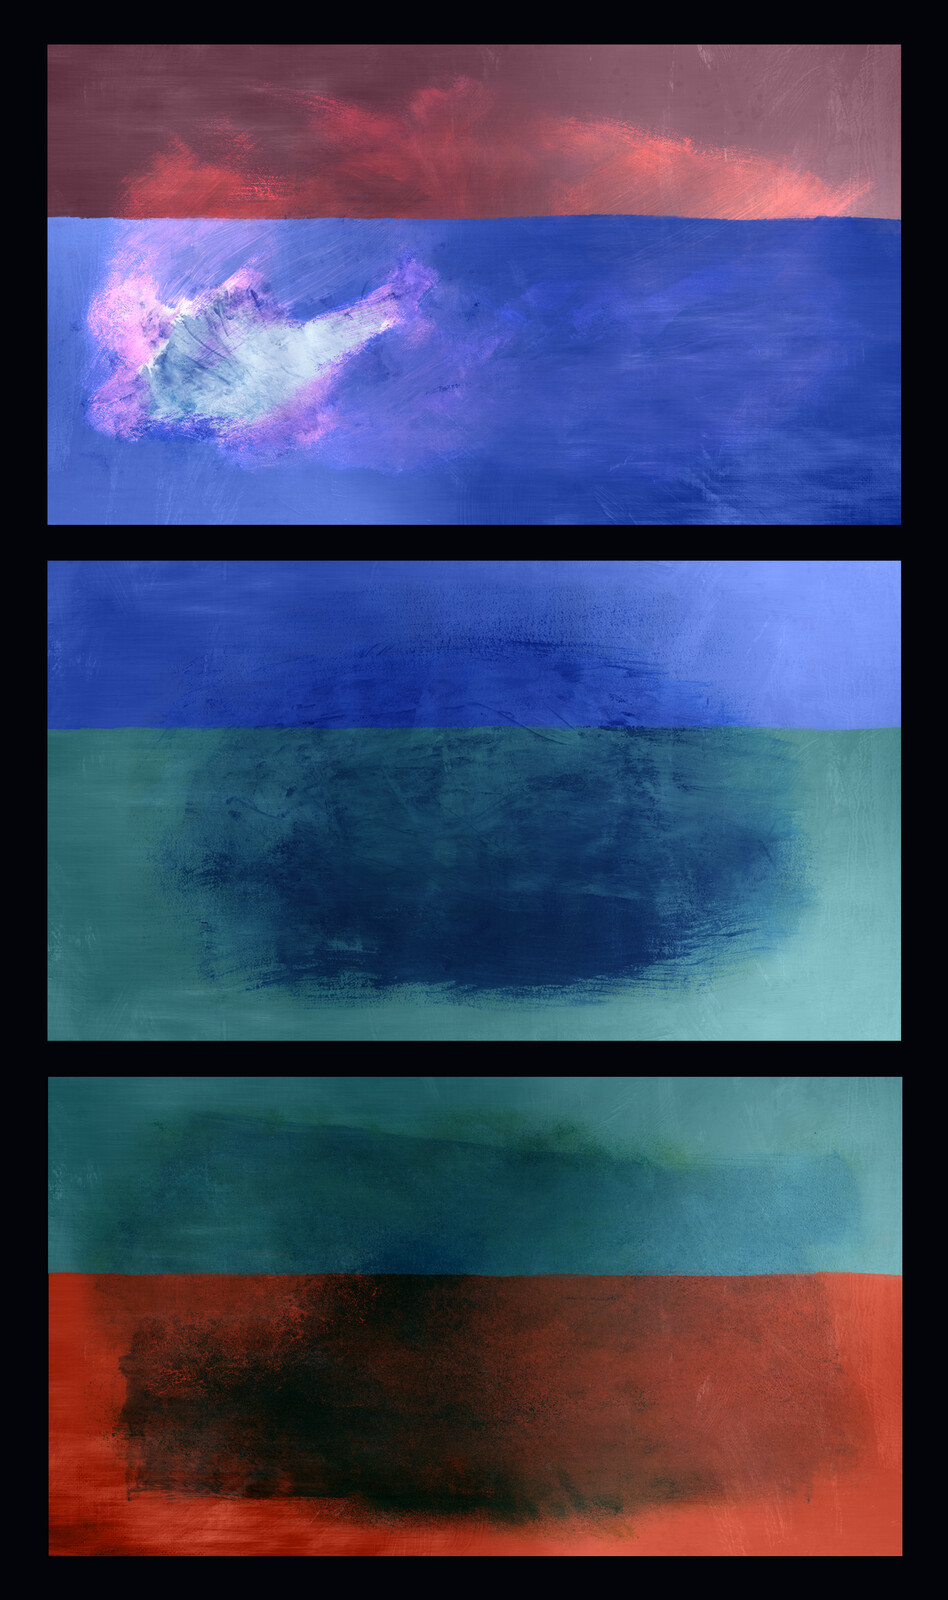 I did all the hallway paintings used in the movie. This series of 3 abstract paintings was my favorite.